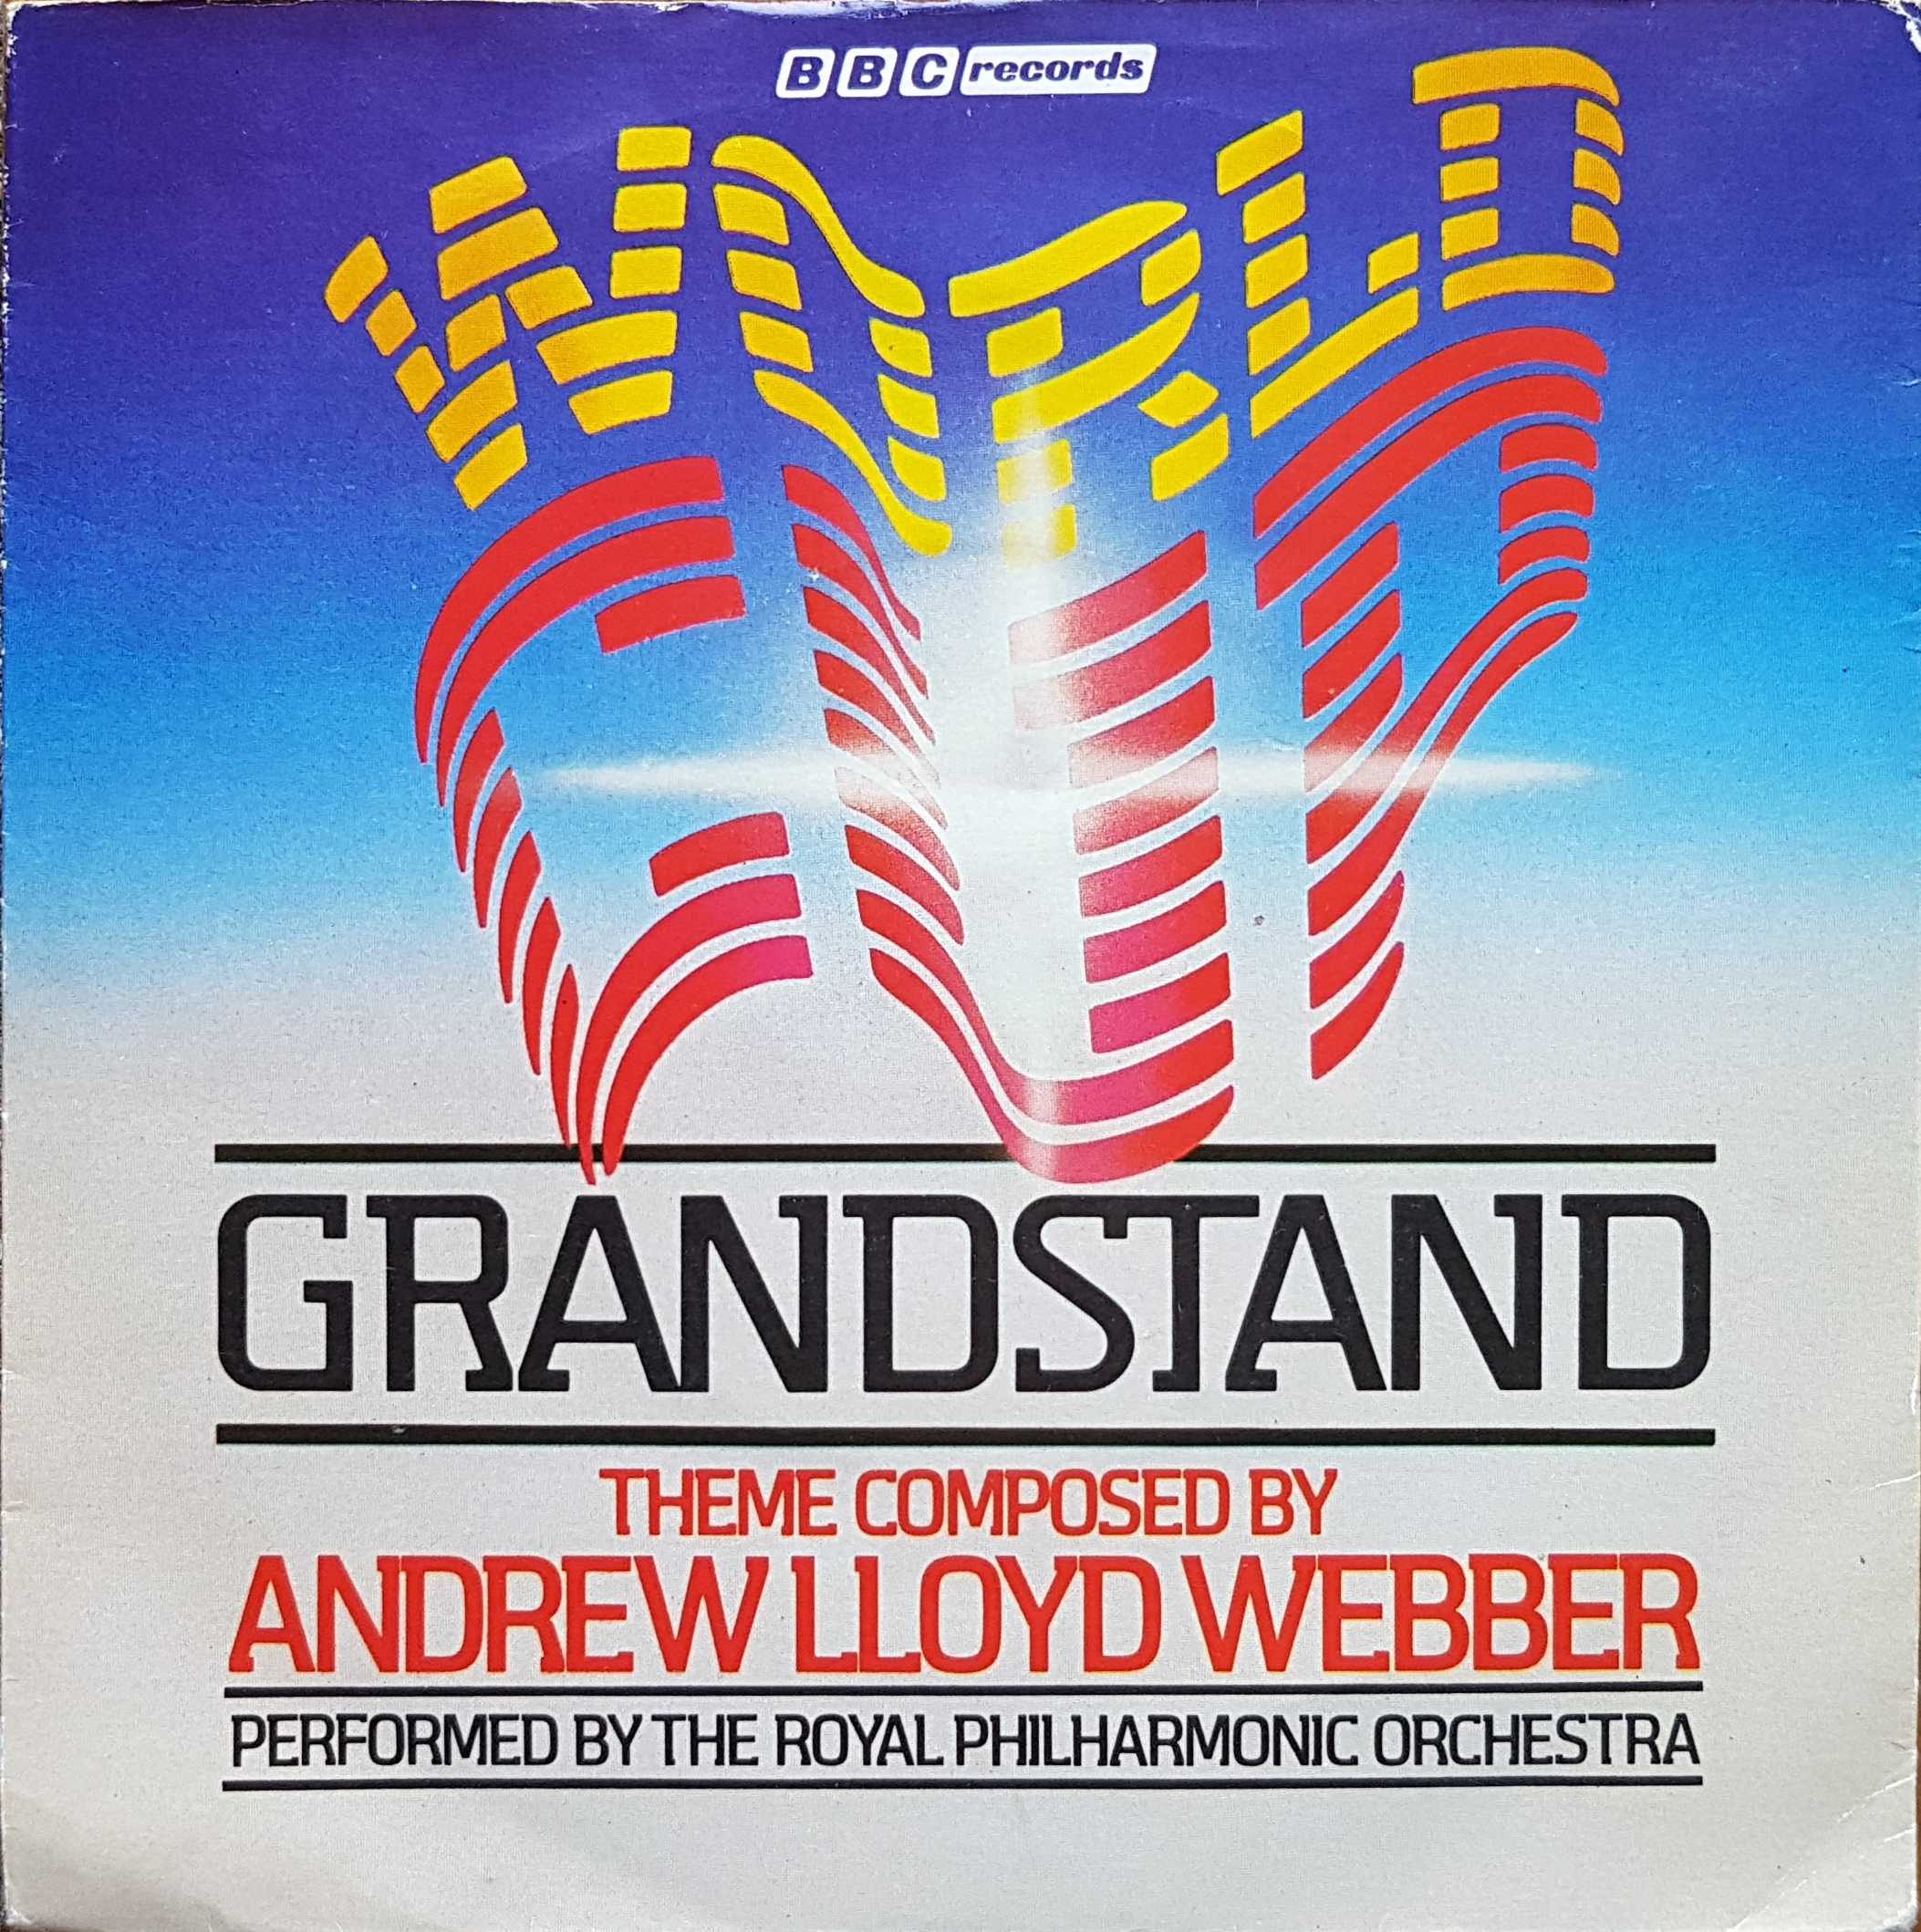 Picture of RESL 116 BBC World Cup Grandstand (1982) by artist Andrew Lloyd Webber from the BBC singles - Records and Tapes library